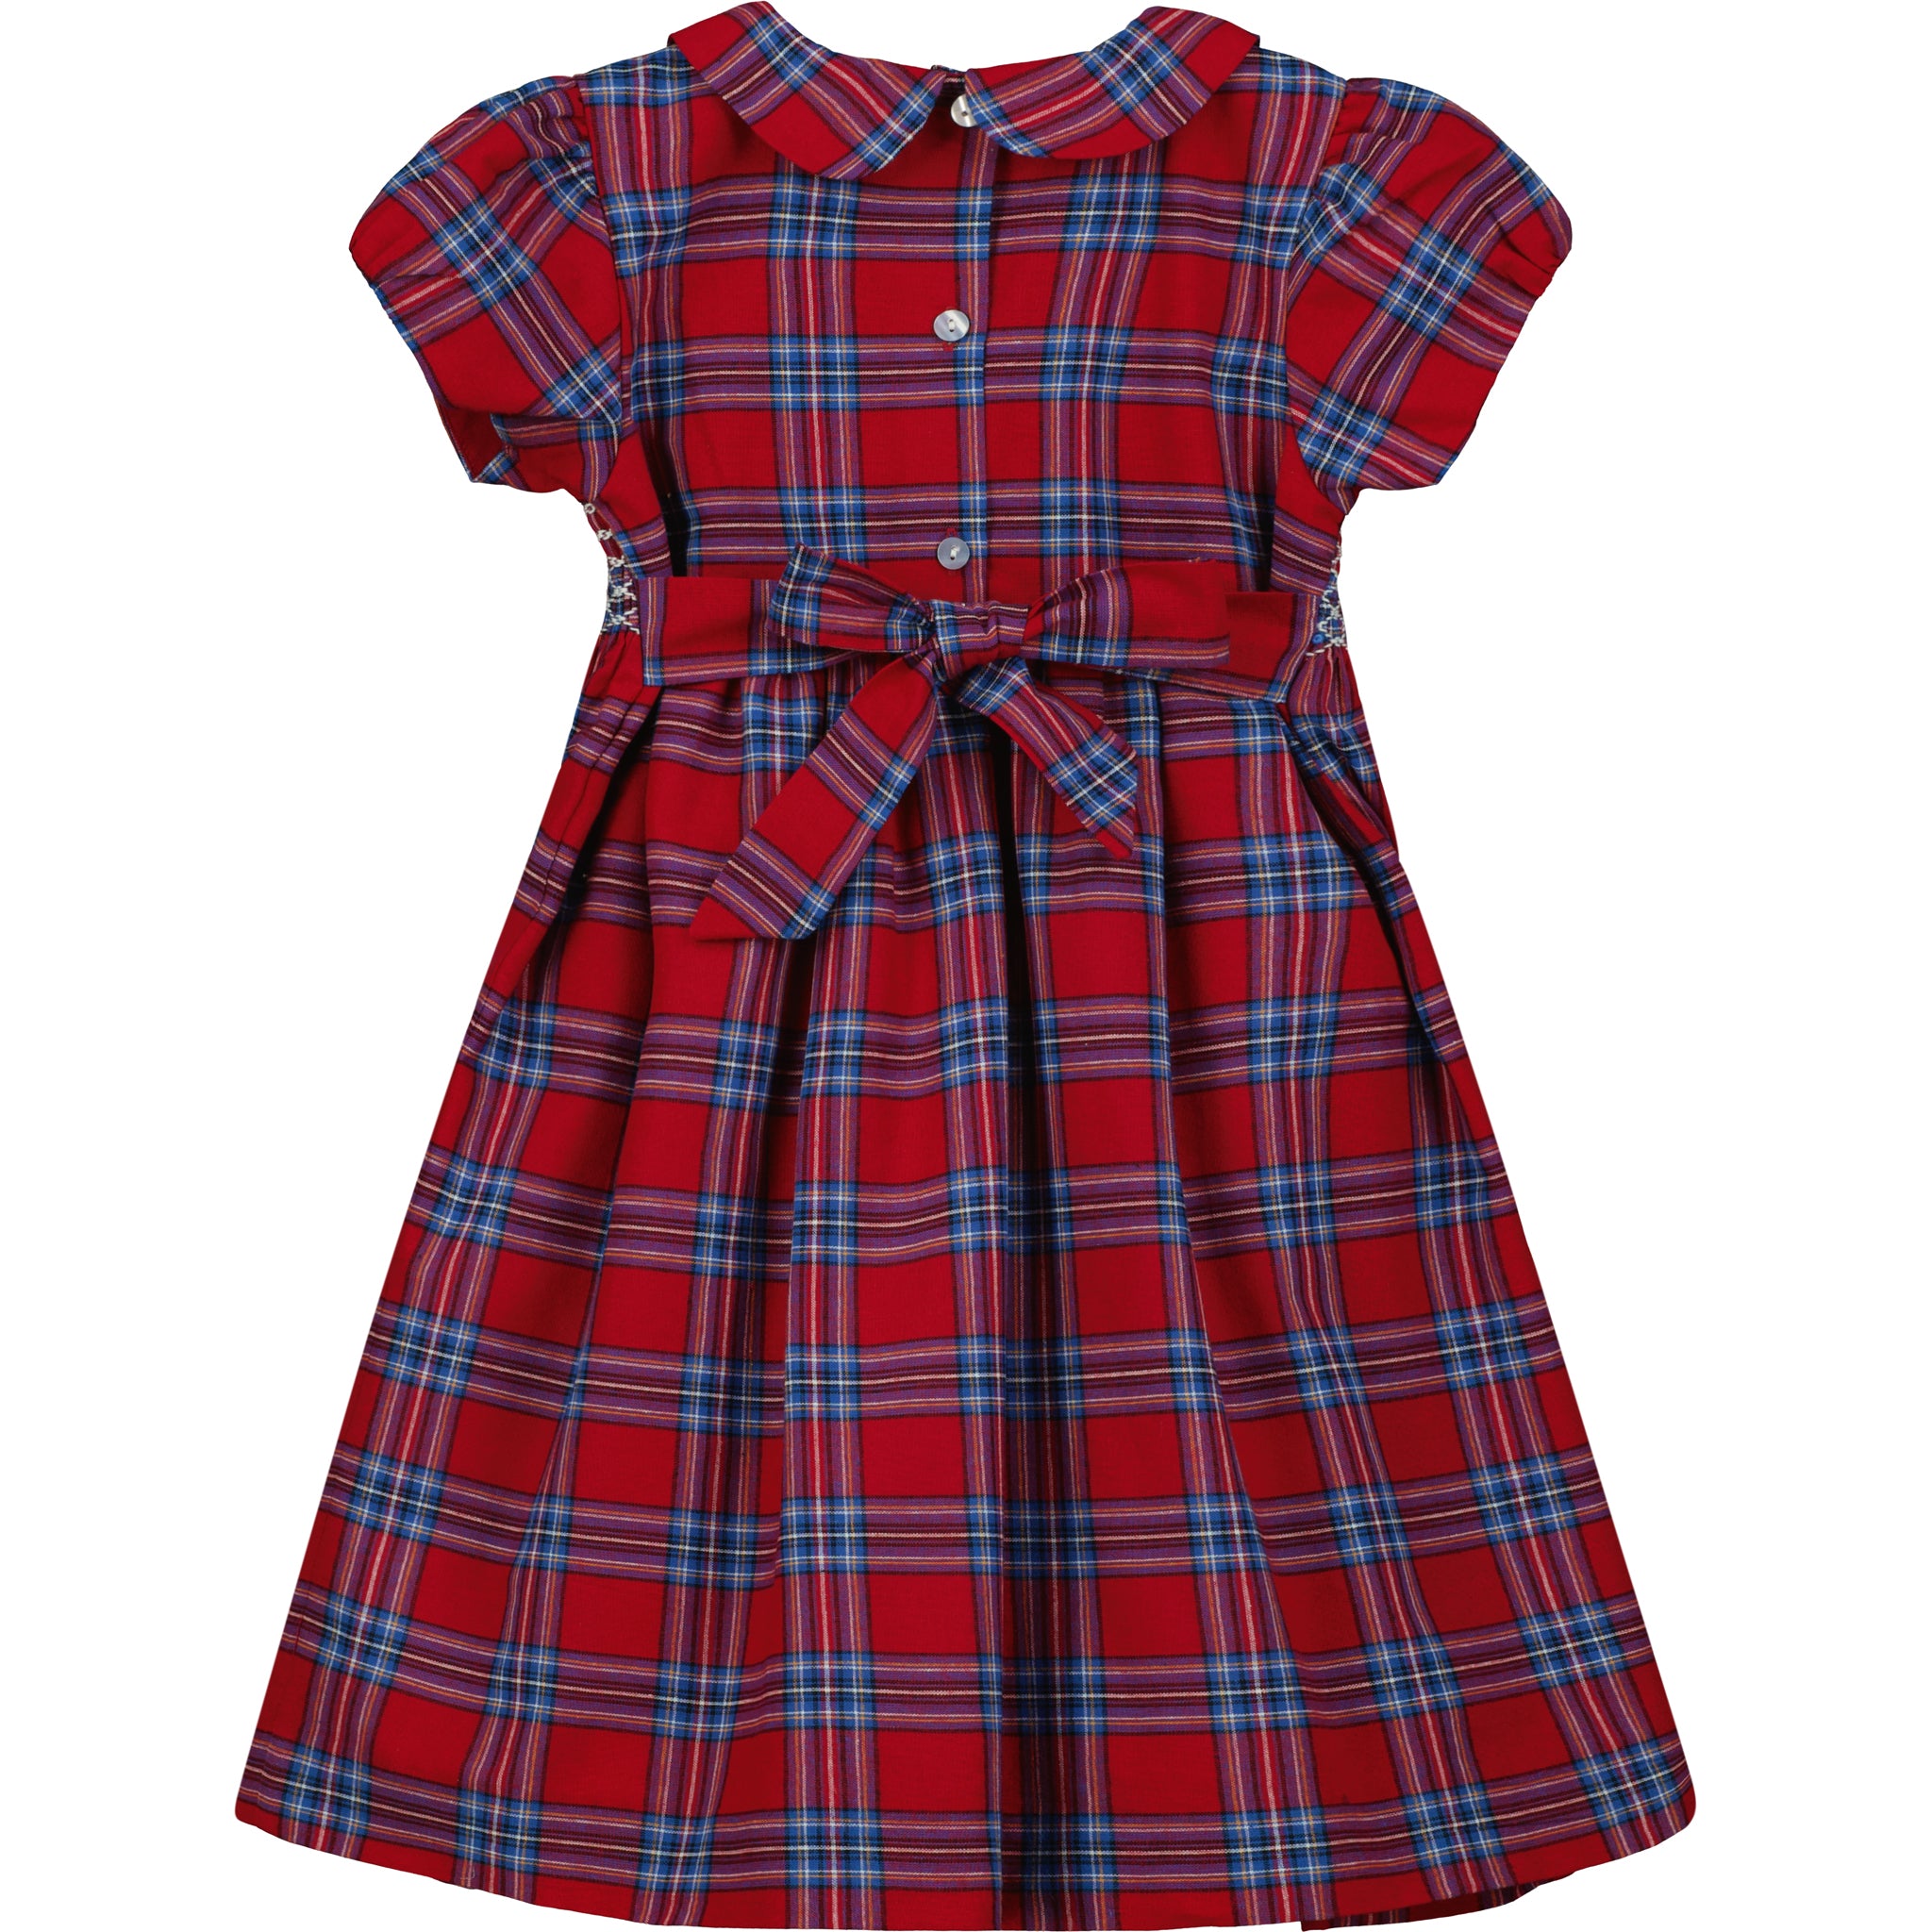 festive red and blue tartan dress  with hand-smocking, back